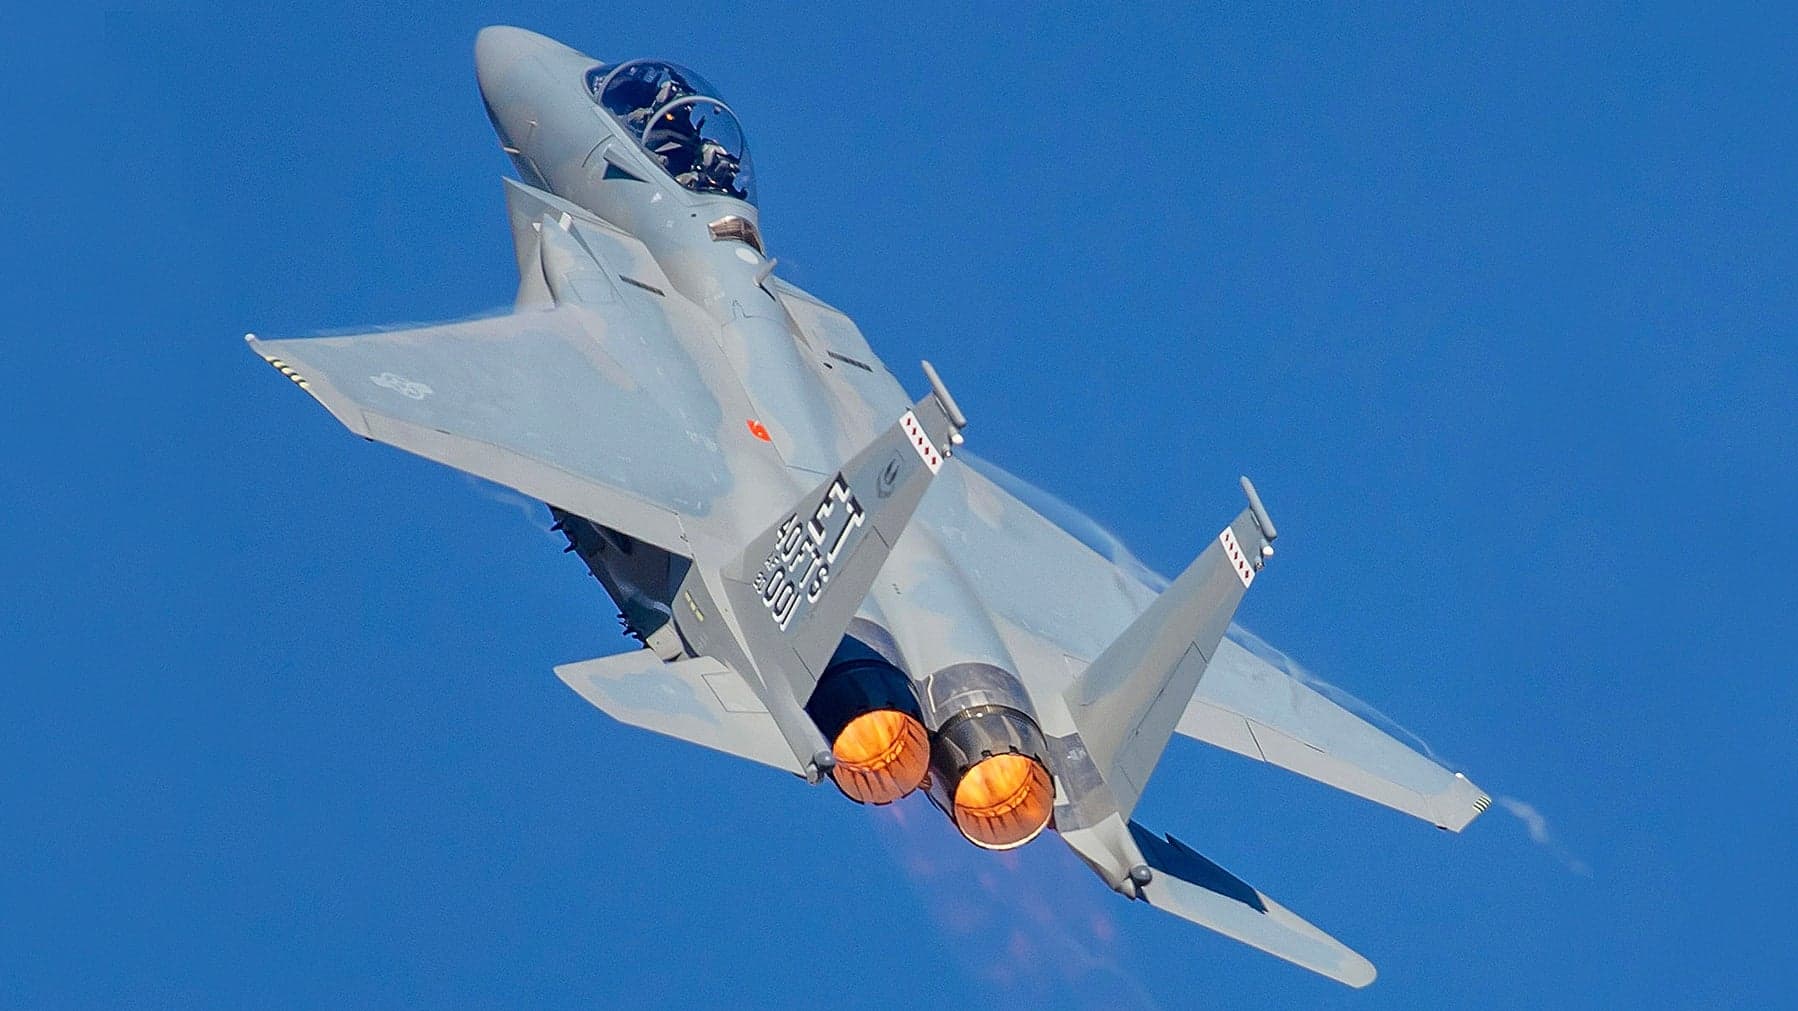 The First F-15EX Fighter Jet Has Now Flown In Its Air Force Colors